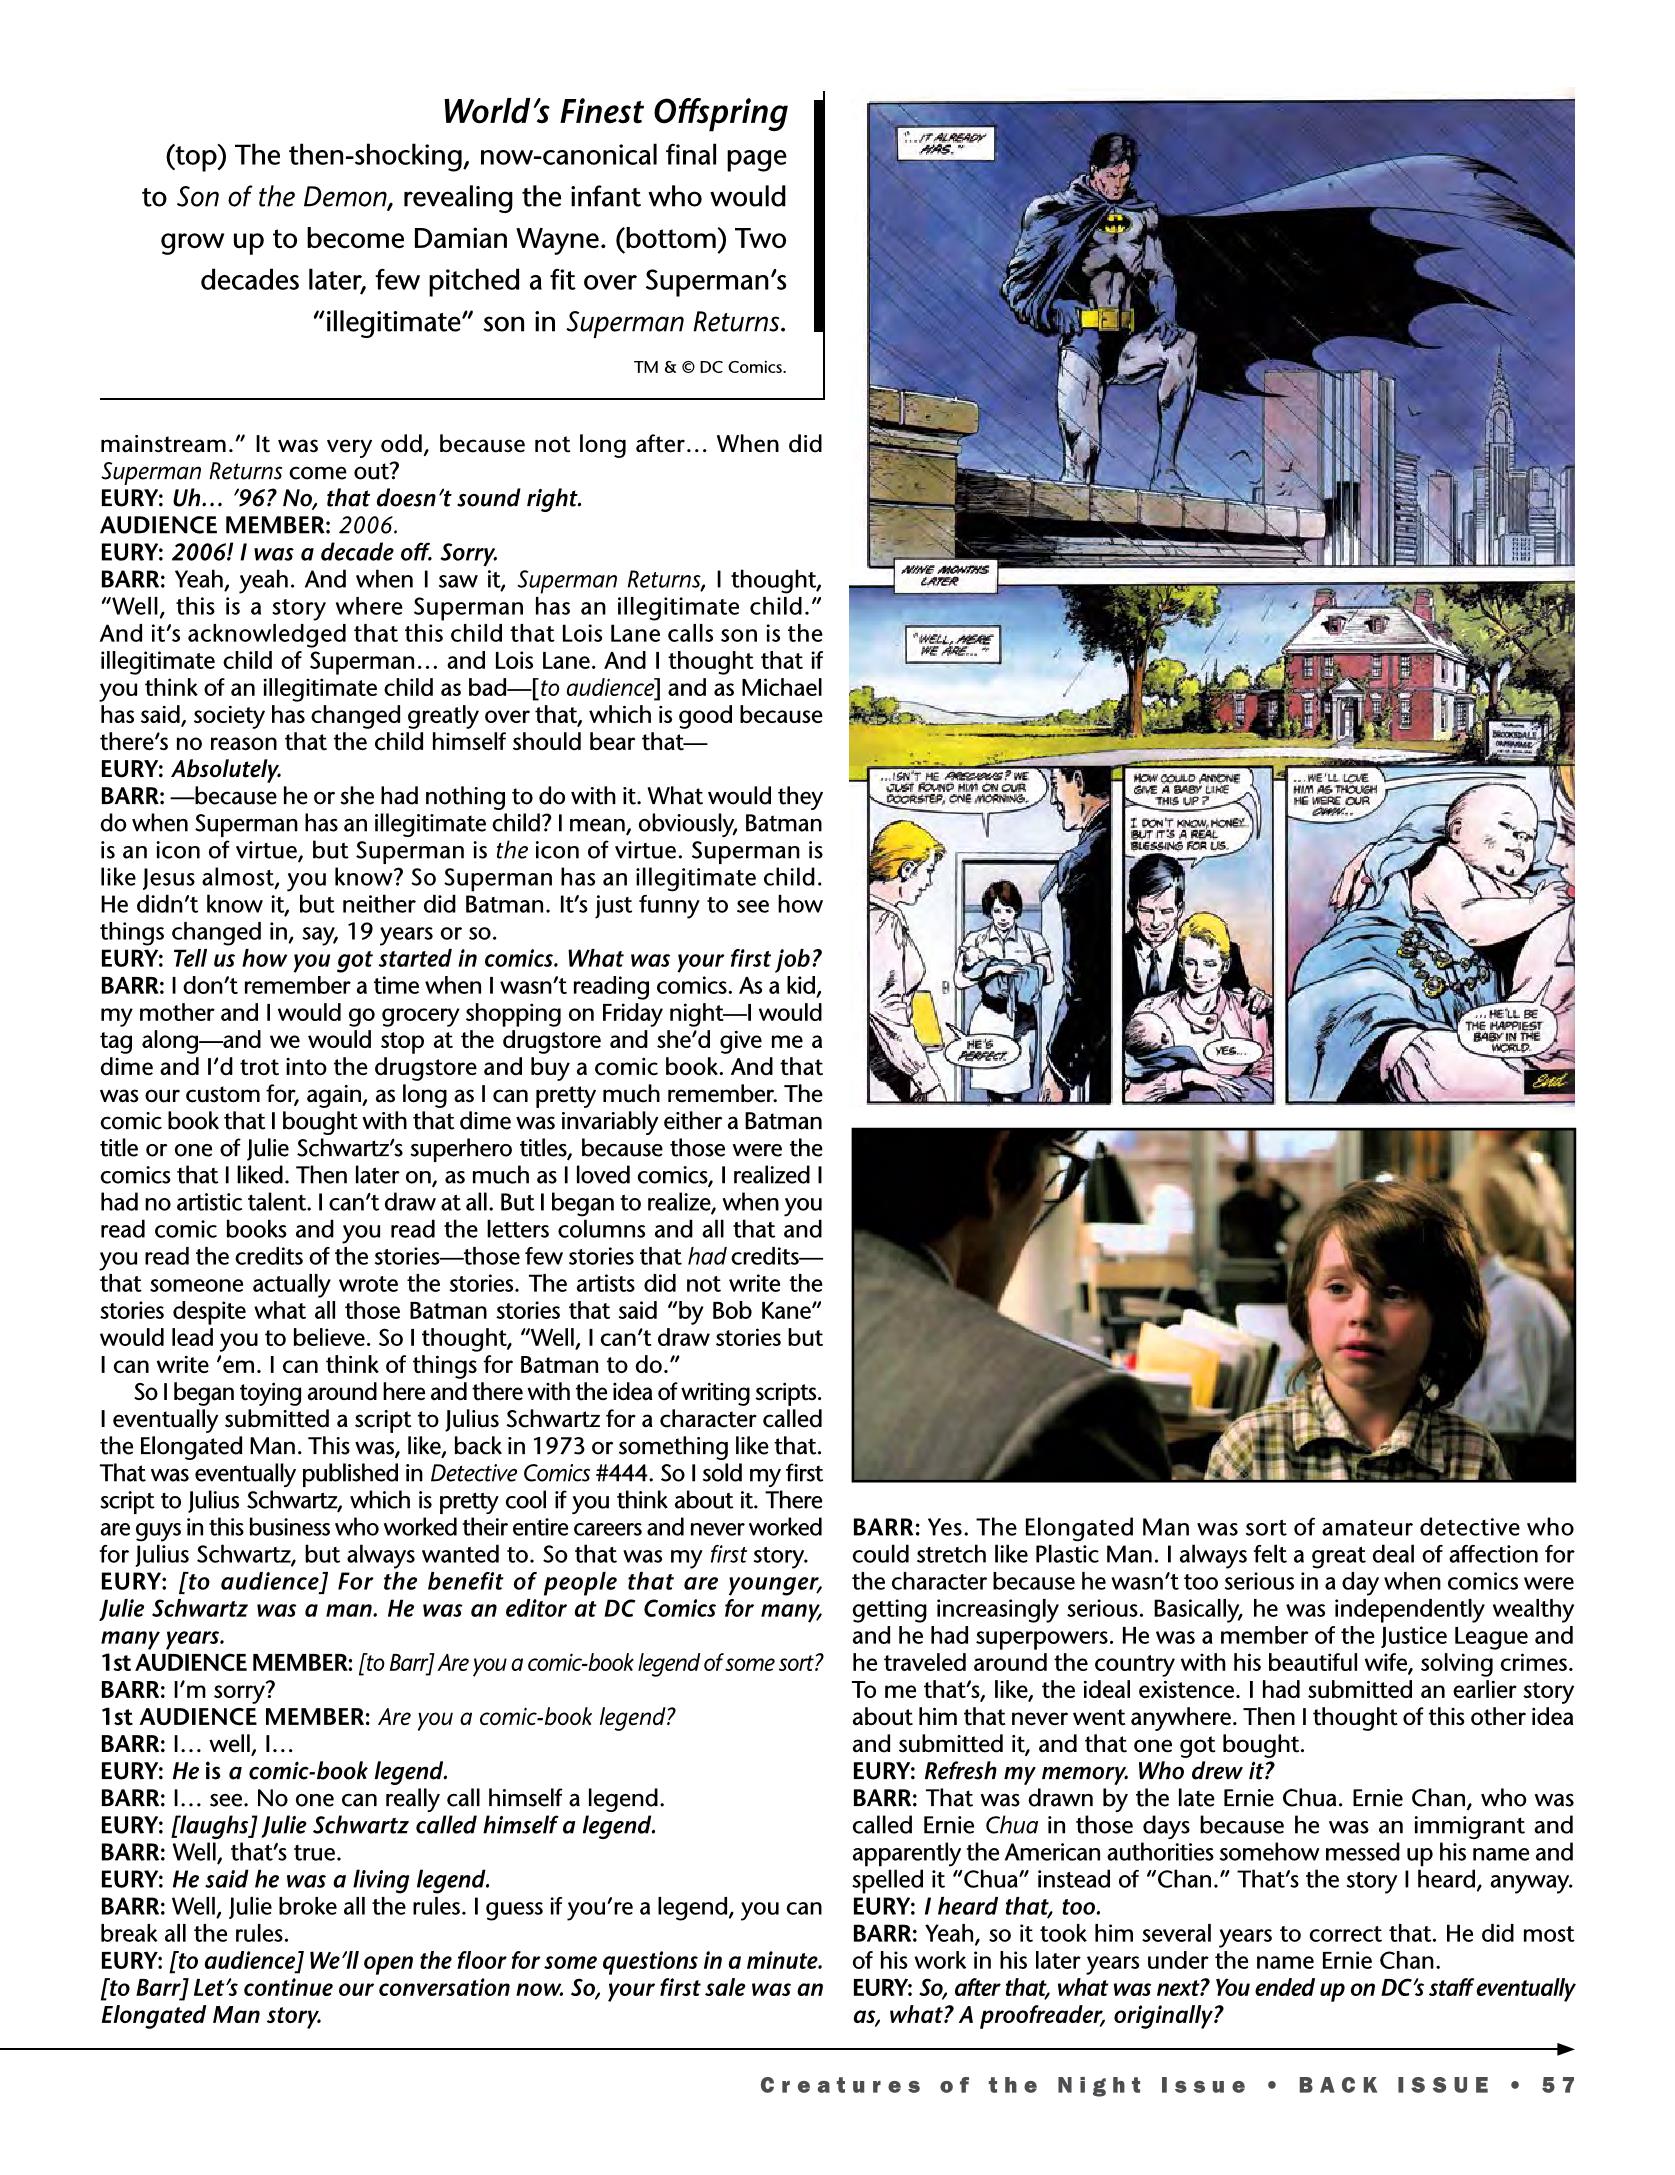 Read online Back Issue comic -  Issue #95 - 55